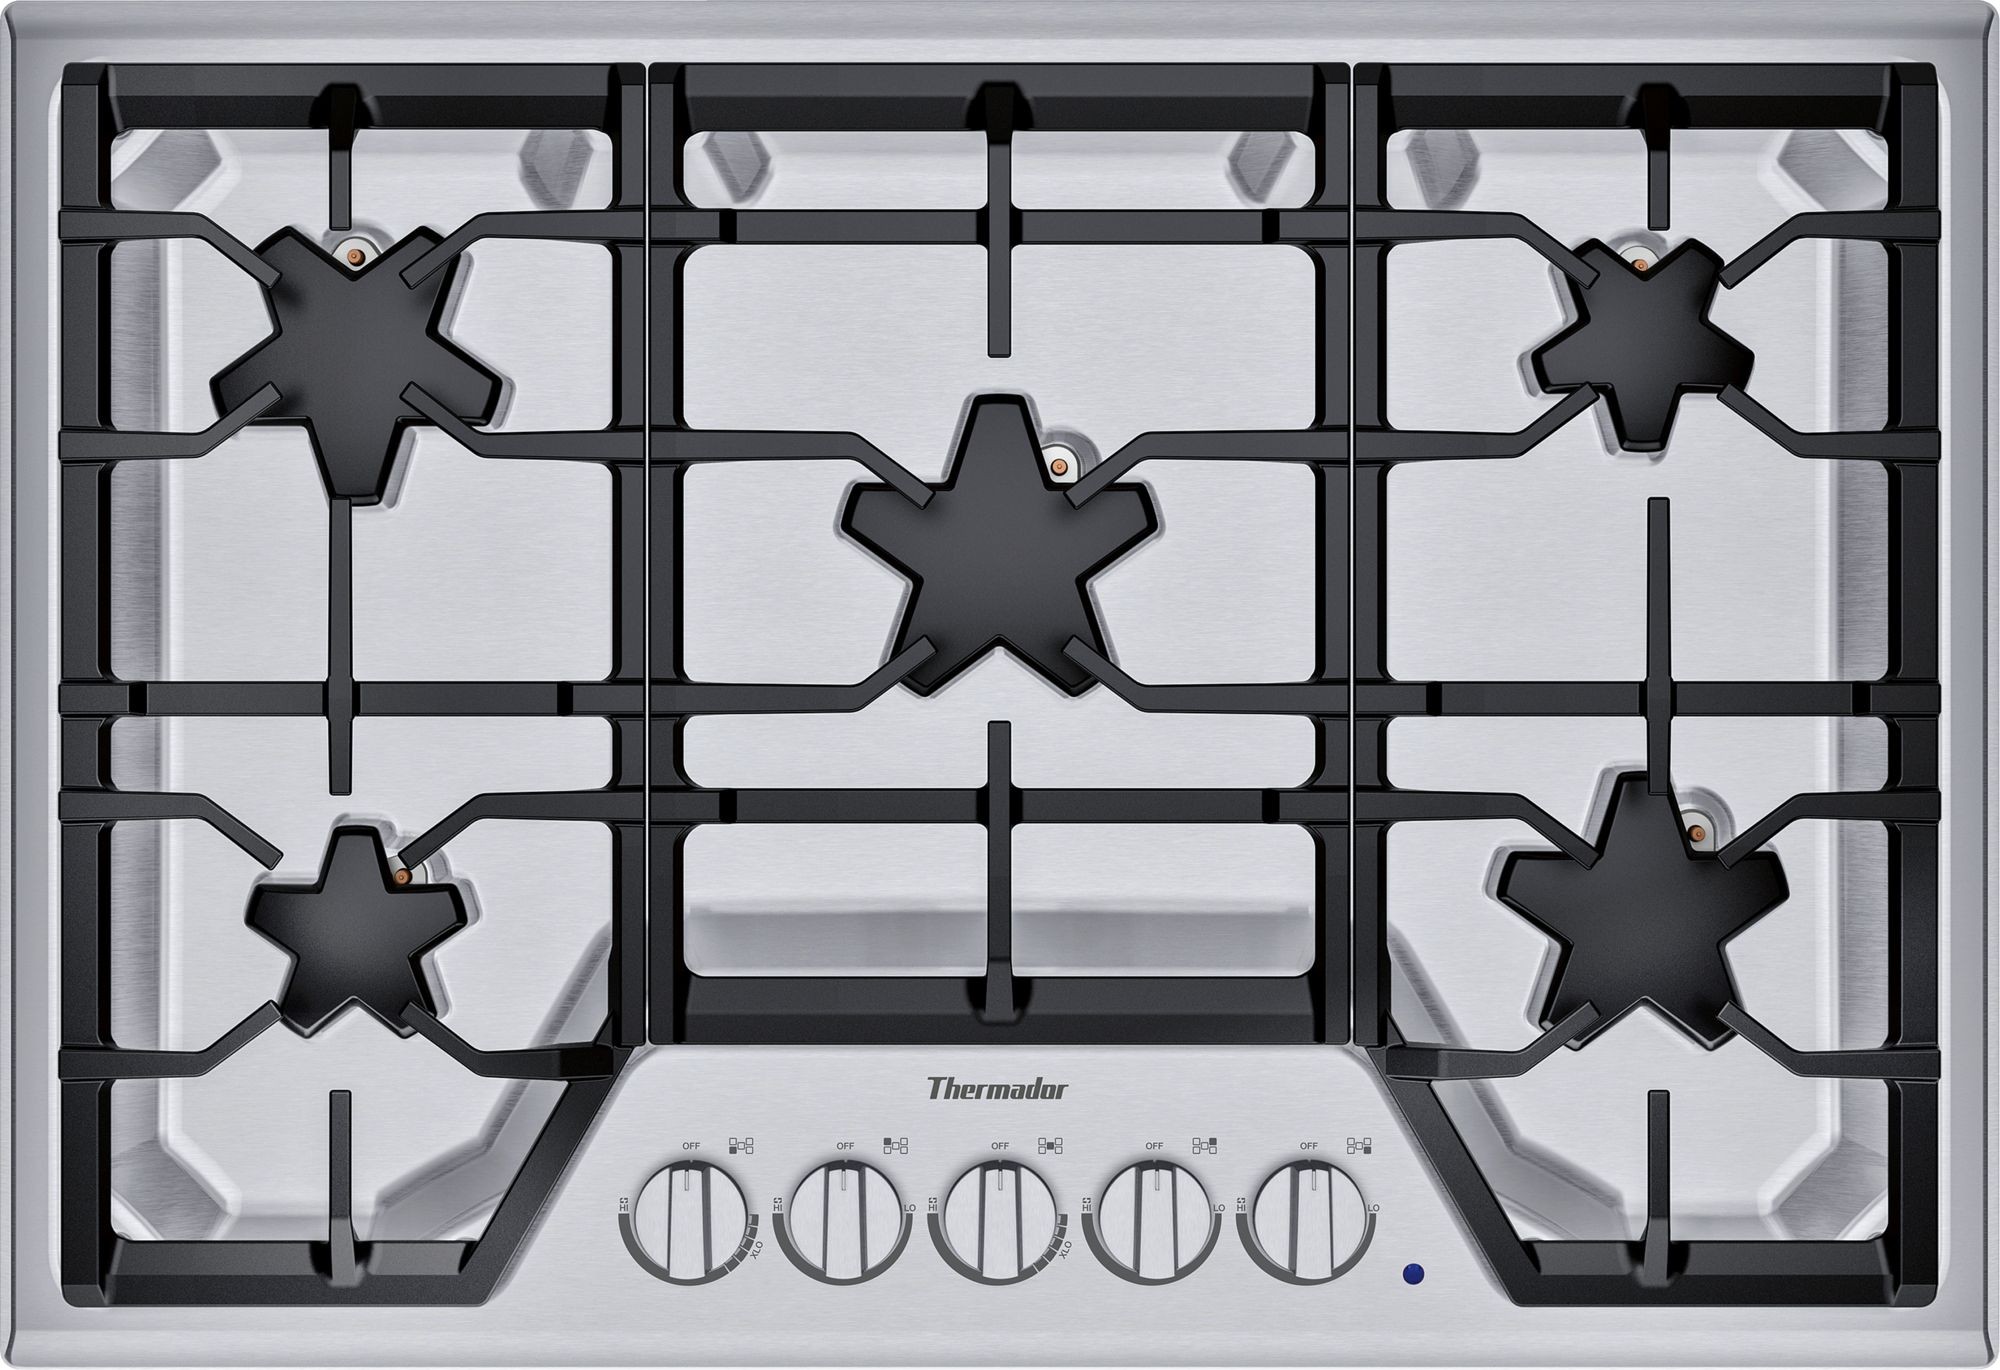 Thermador Masterpiece 30 Natural Gas Drop-In Cooktop SGSX305TS